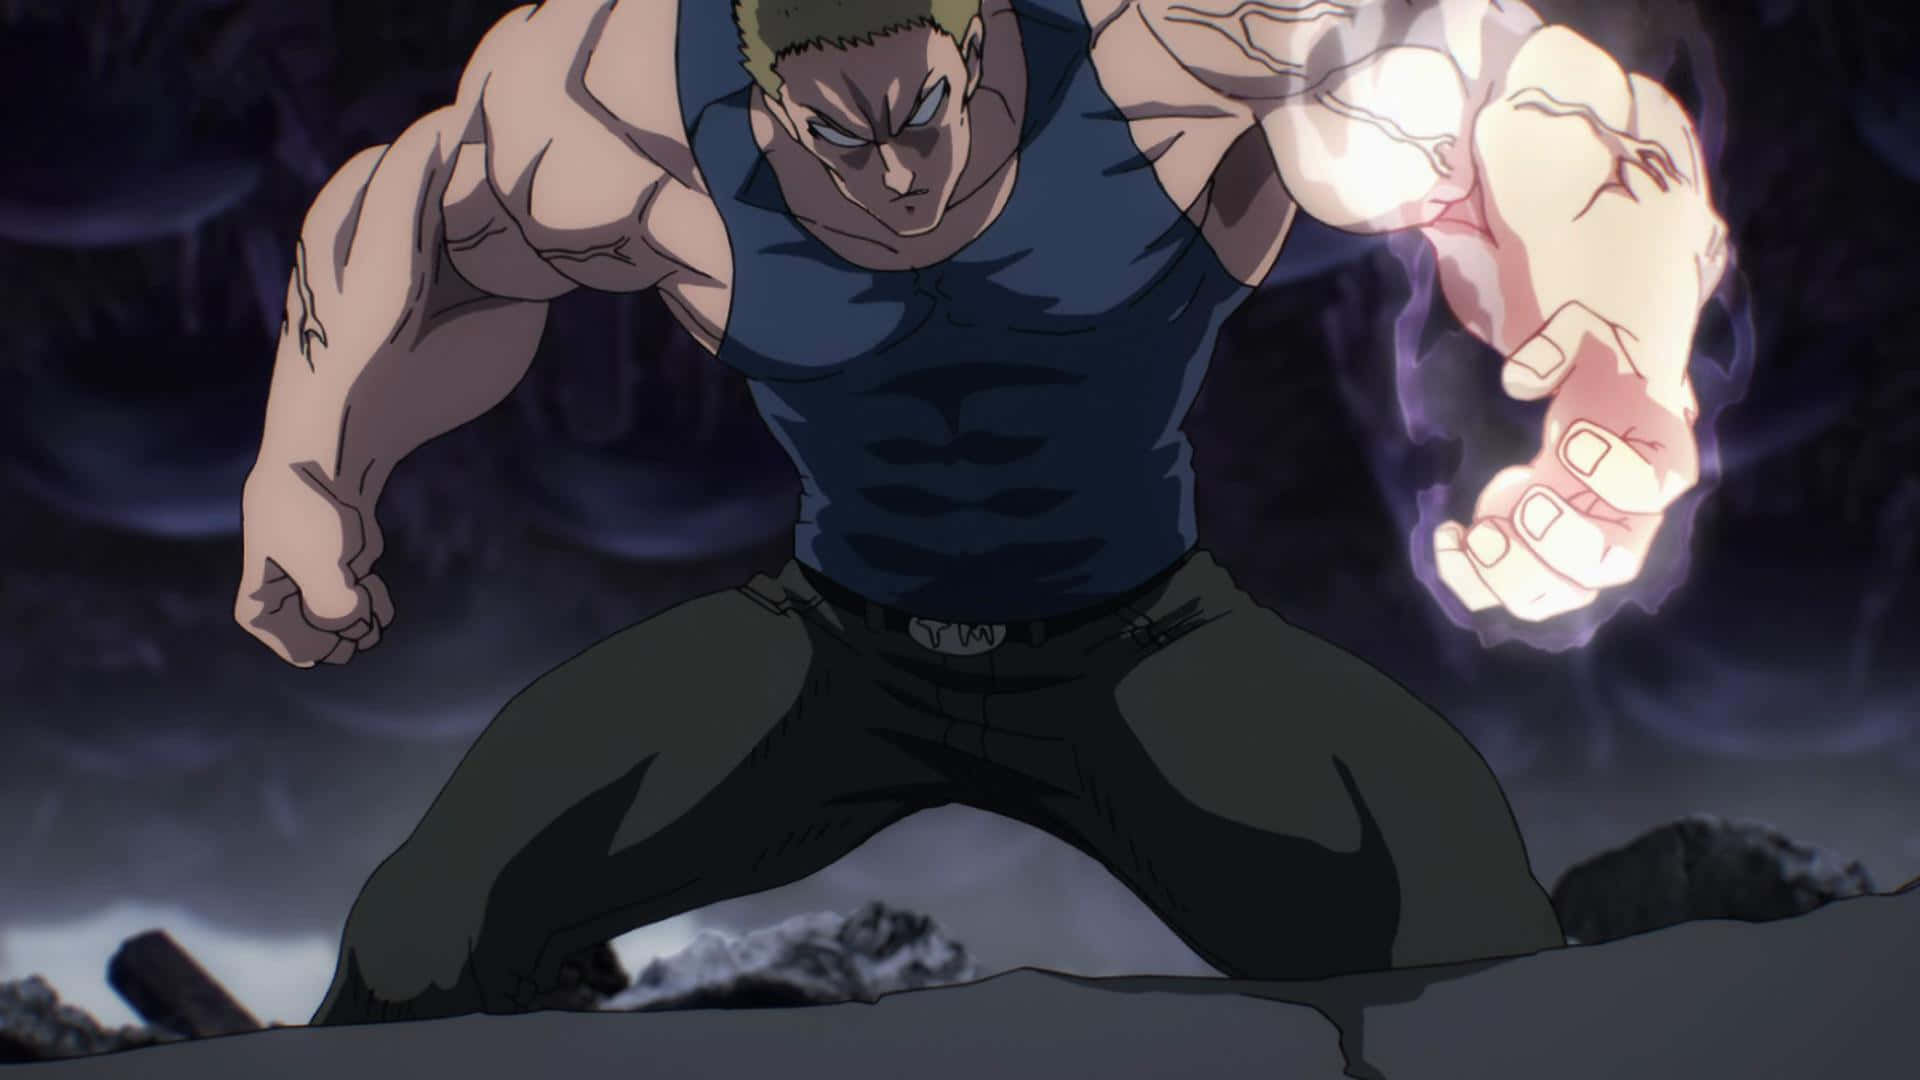 Tanktop Master showing off incredible strength in action Wallpaper